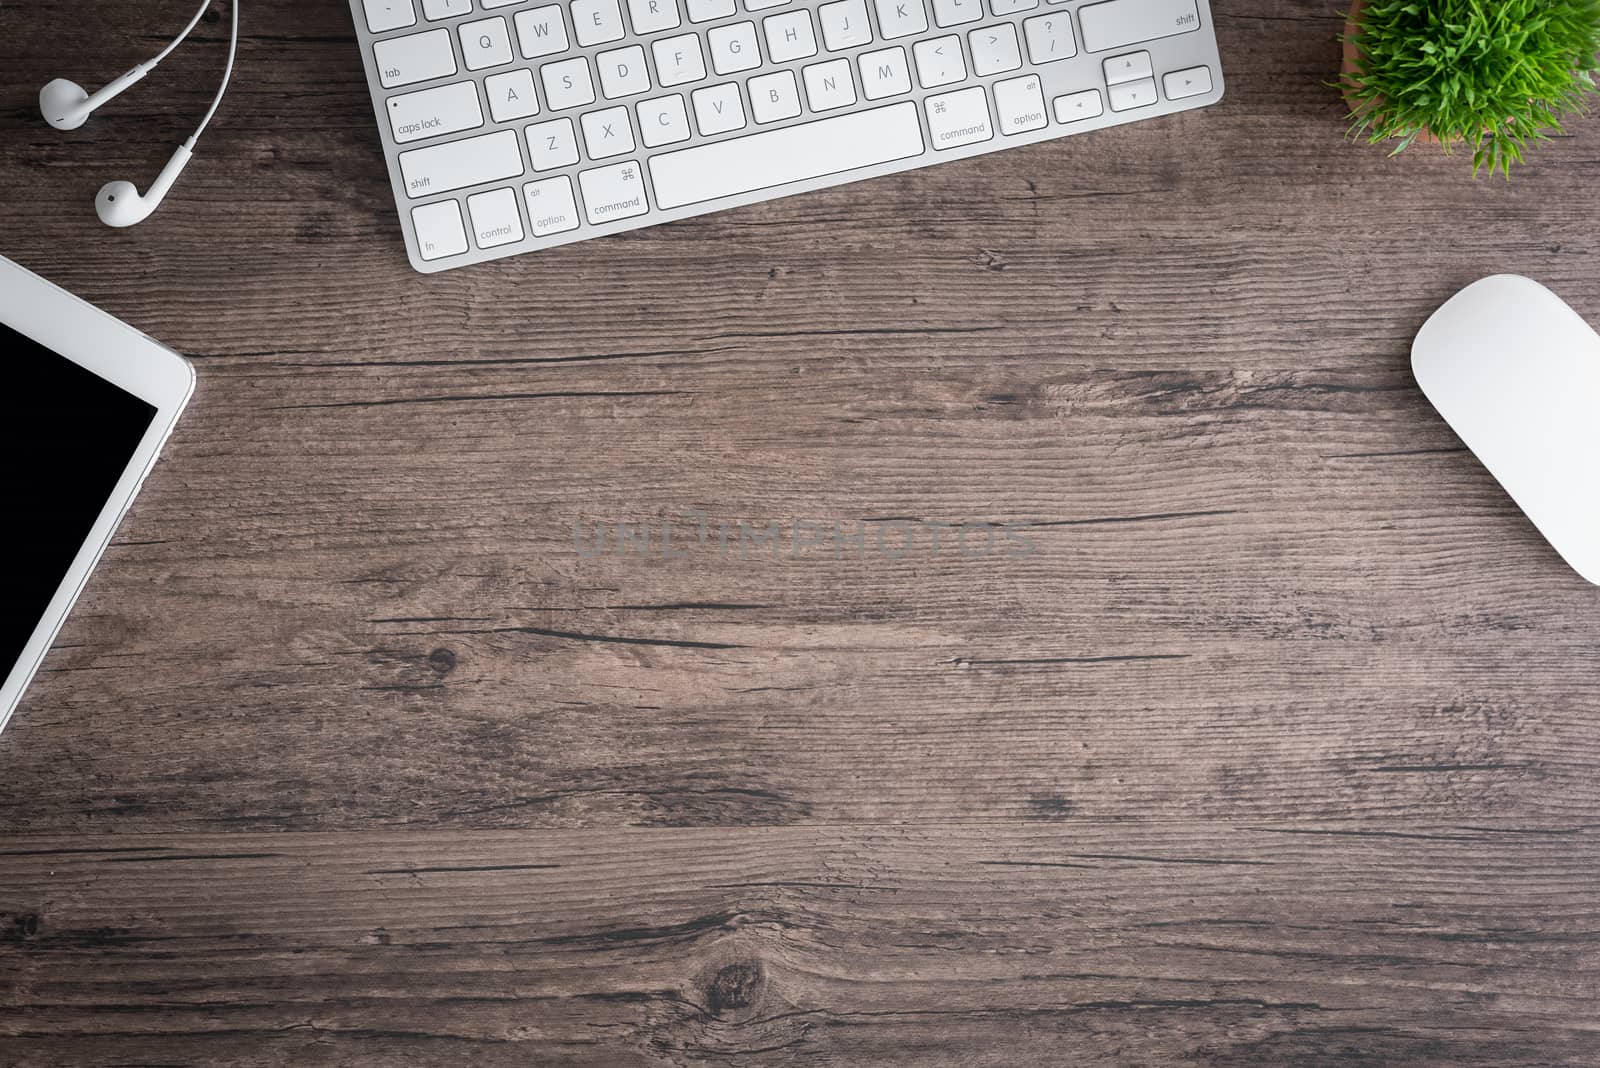 The office desk flat lay view with keyboard, mouse, tree and earphone on wood texture background.